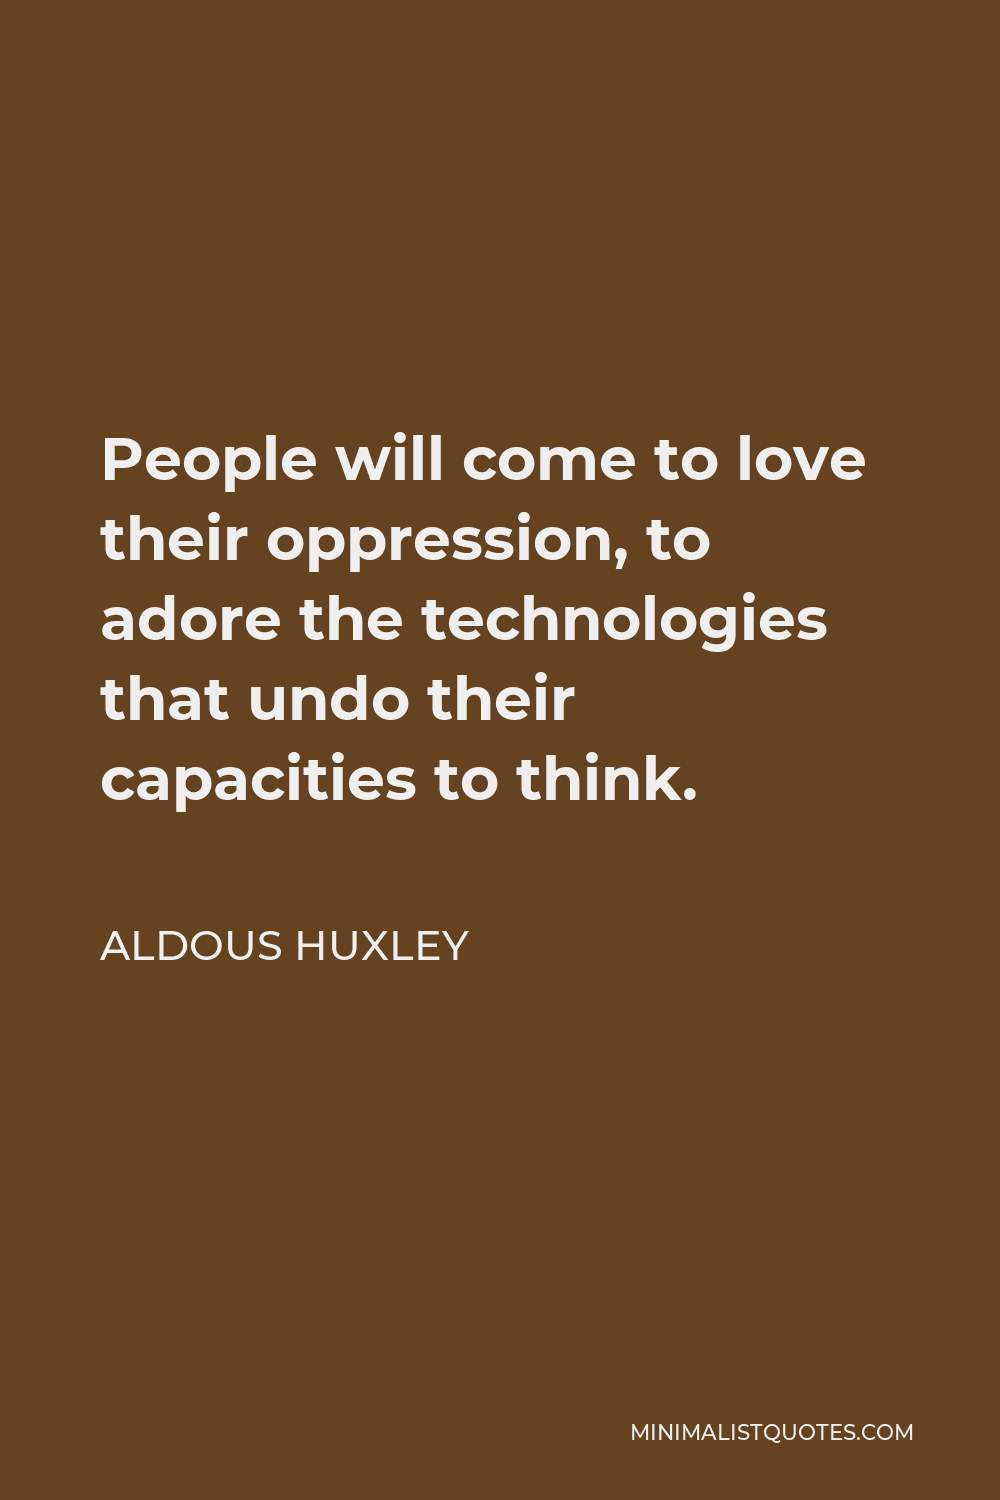 Aldous Huxley Quote - People will come to love their oppression, to adore the technologies that undo their capacities to think.